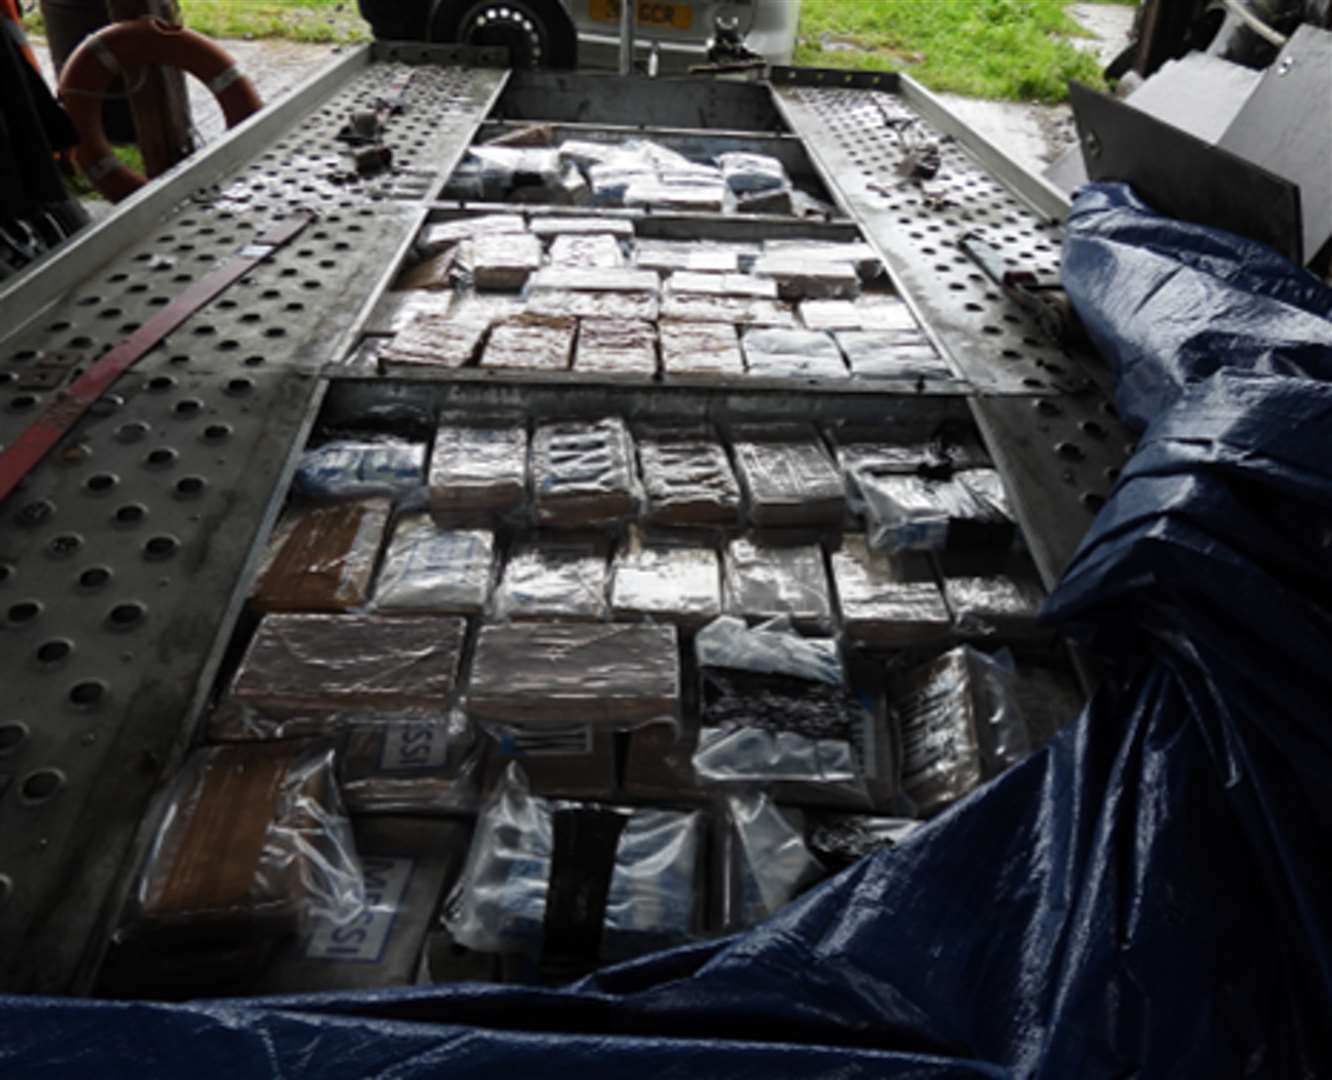 Drugs smuggled into the UK in a trailer which had been converted to include a hide so drugs could be stored in it (NWROCU)